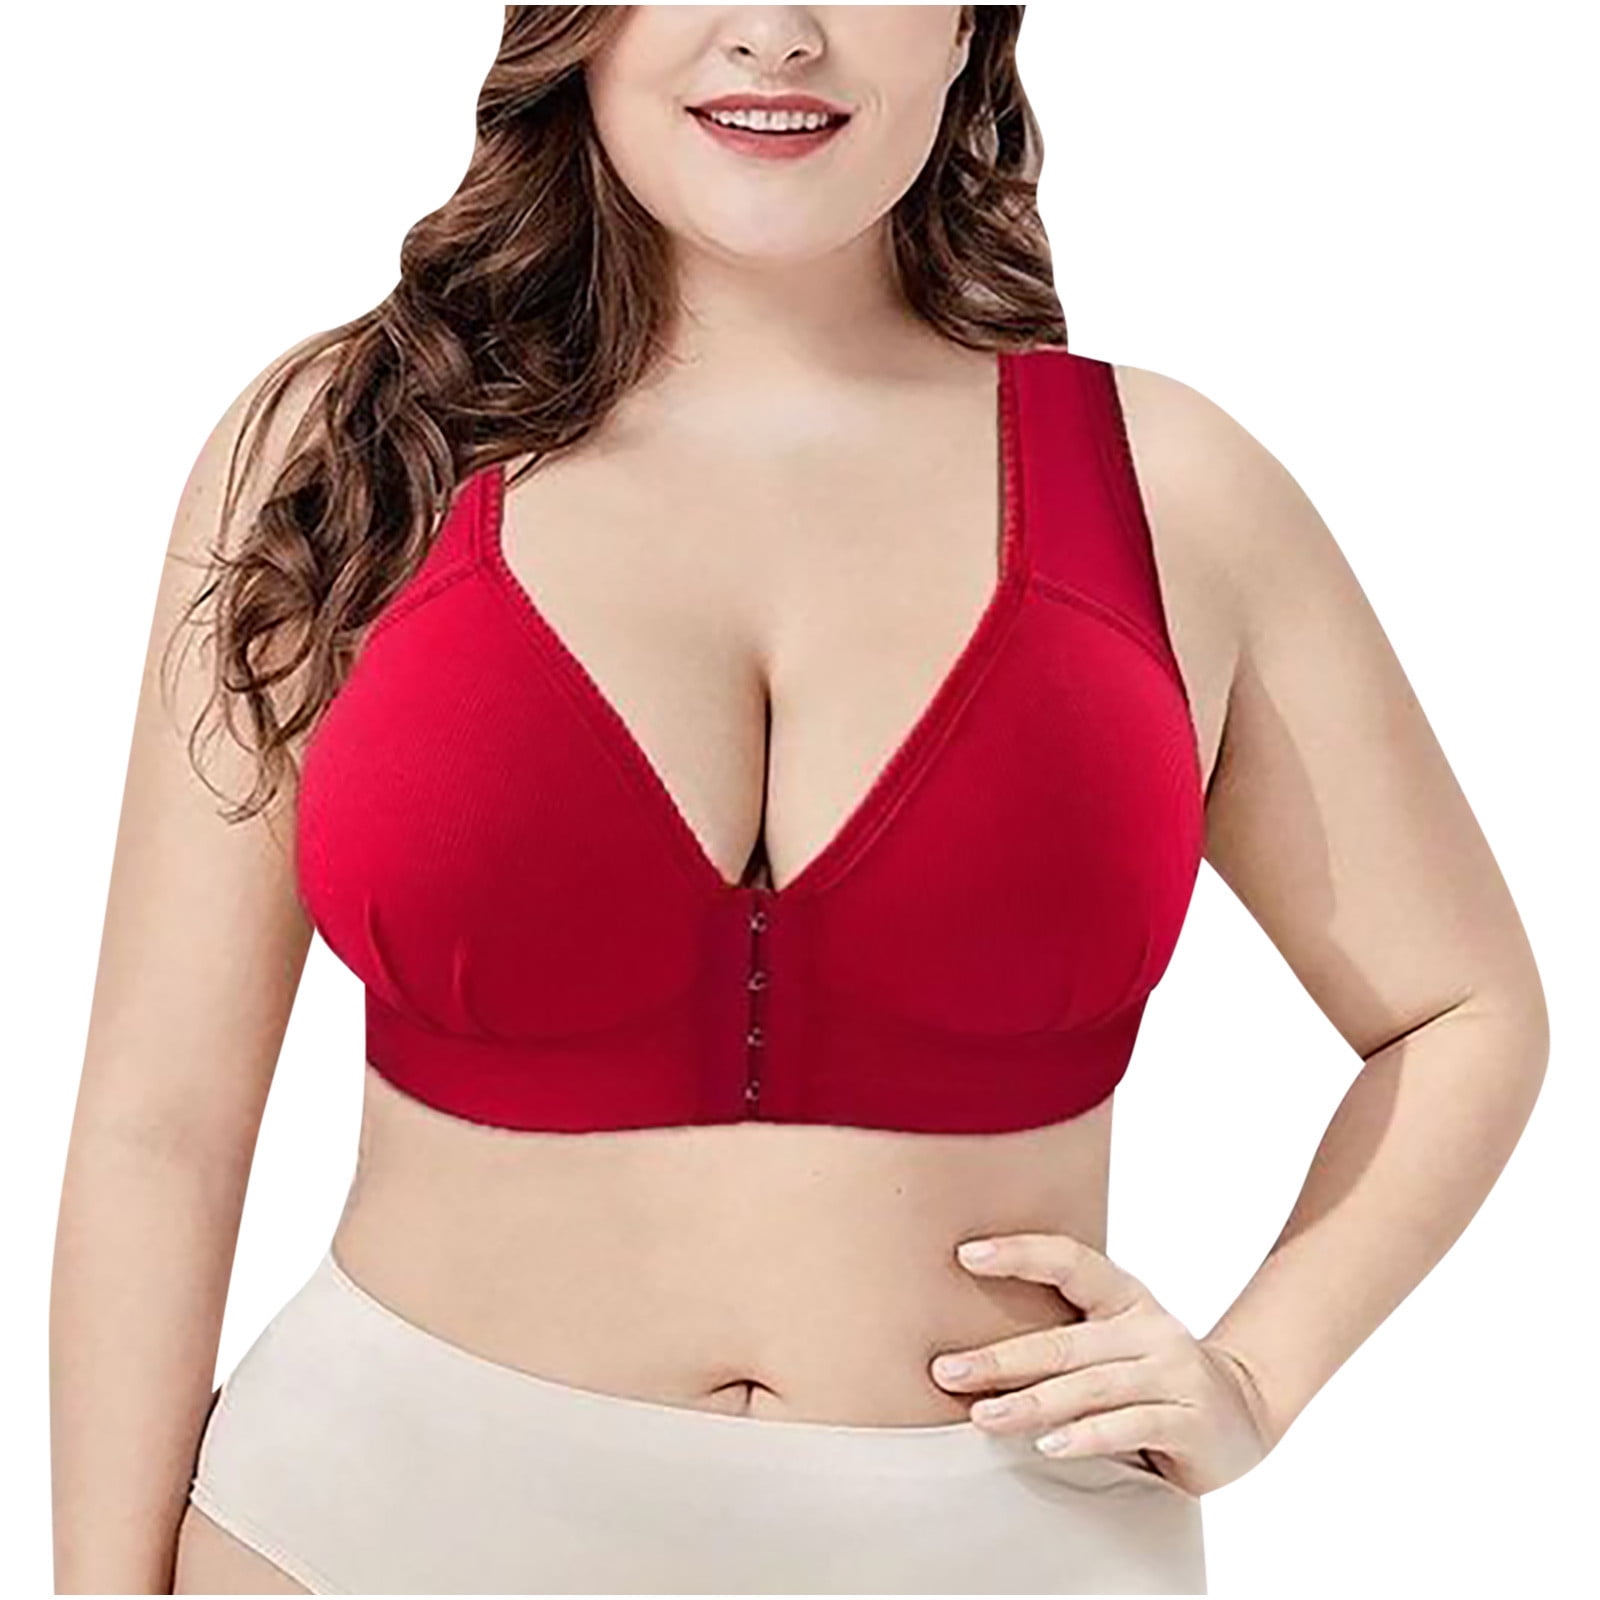  XMSM Plus Size Bra for Women Large Breasts Sexy